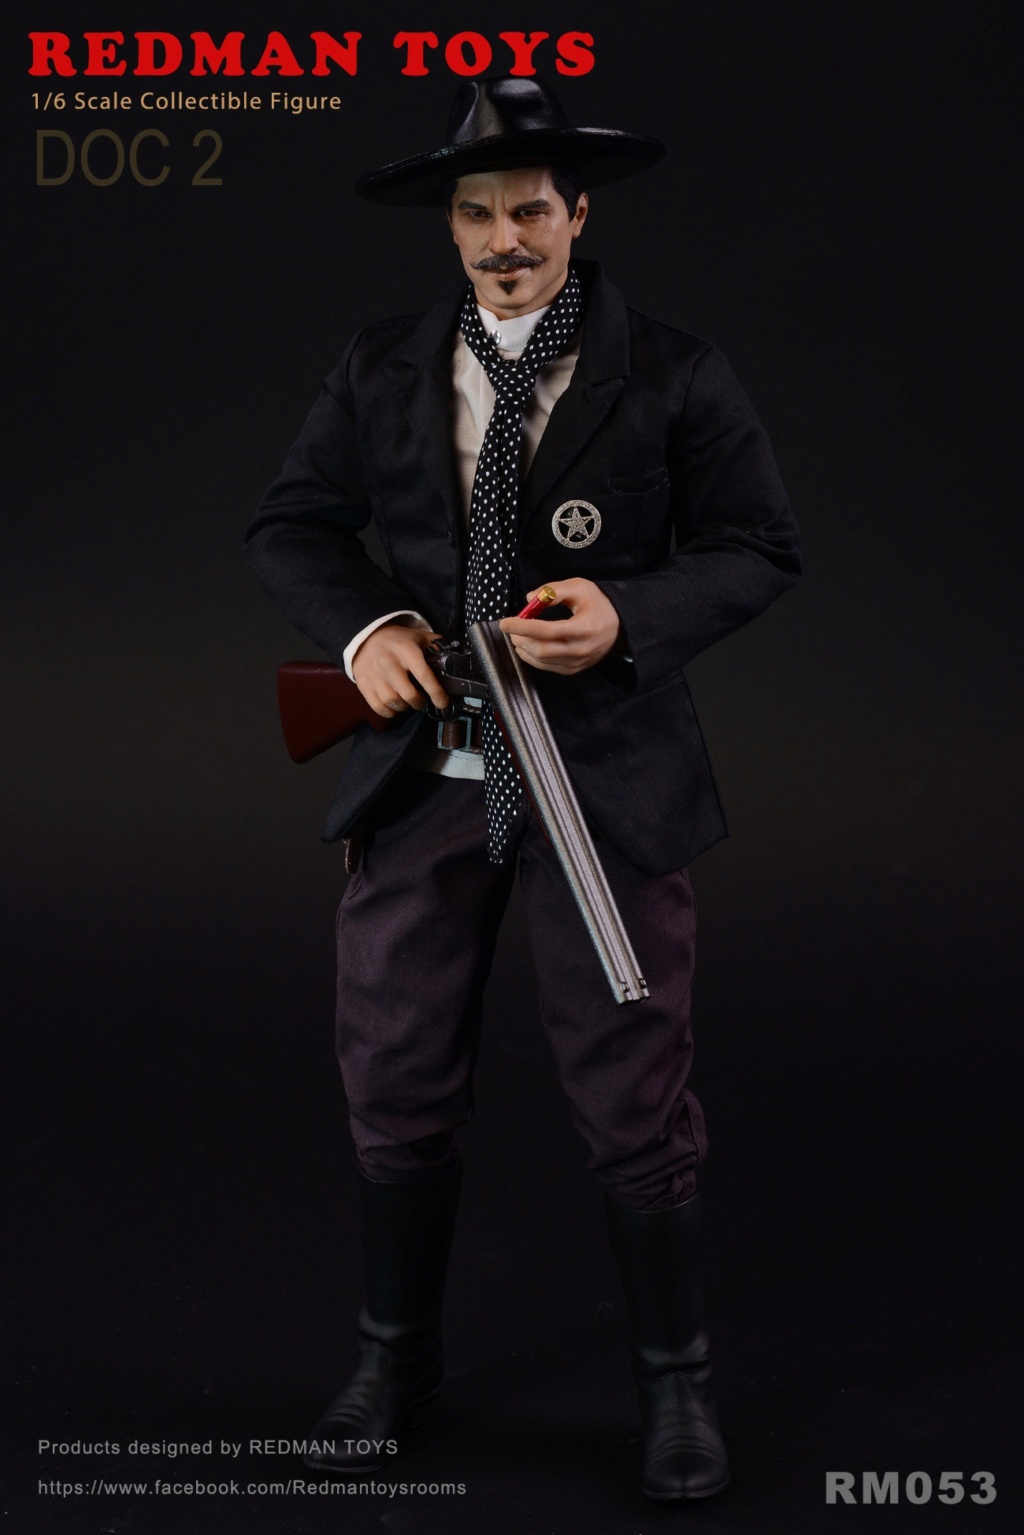 NEW PRODUCT: Redman Toys: 1/6 Tombstone Town-DOC 1, DOC 2, Town Marshal 02475310